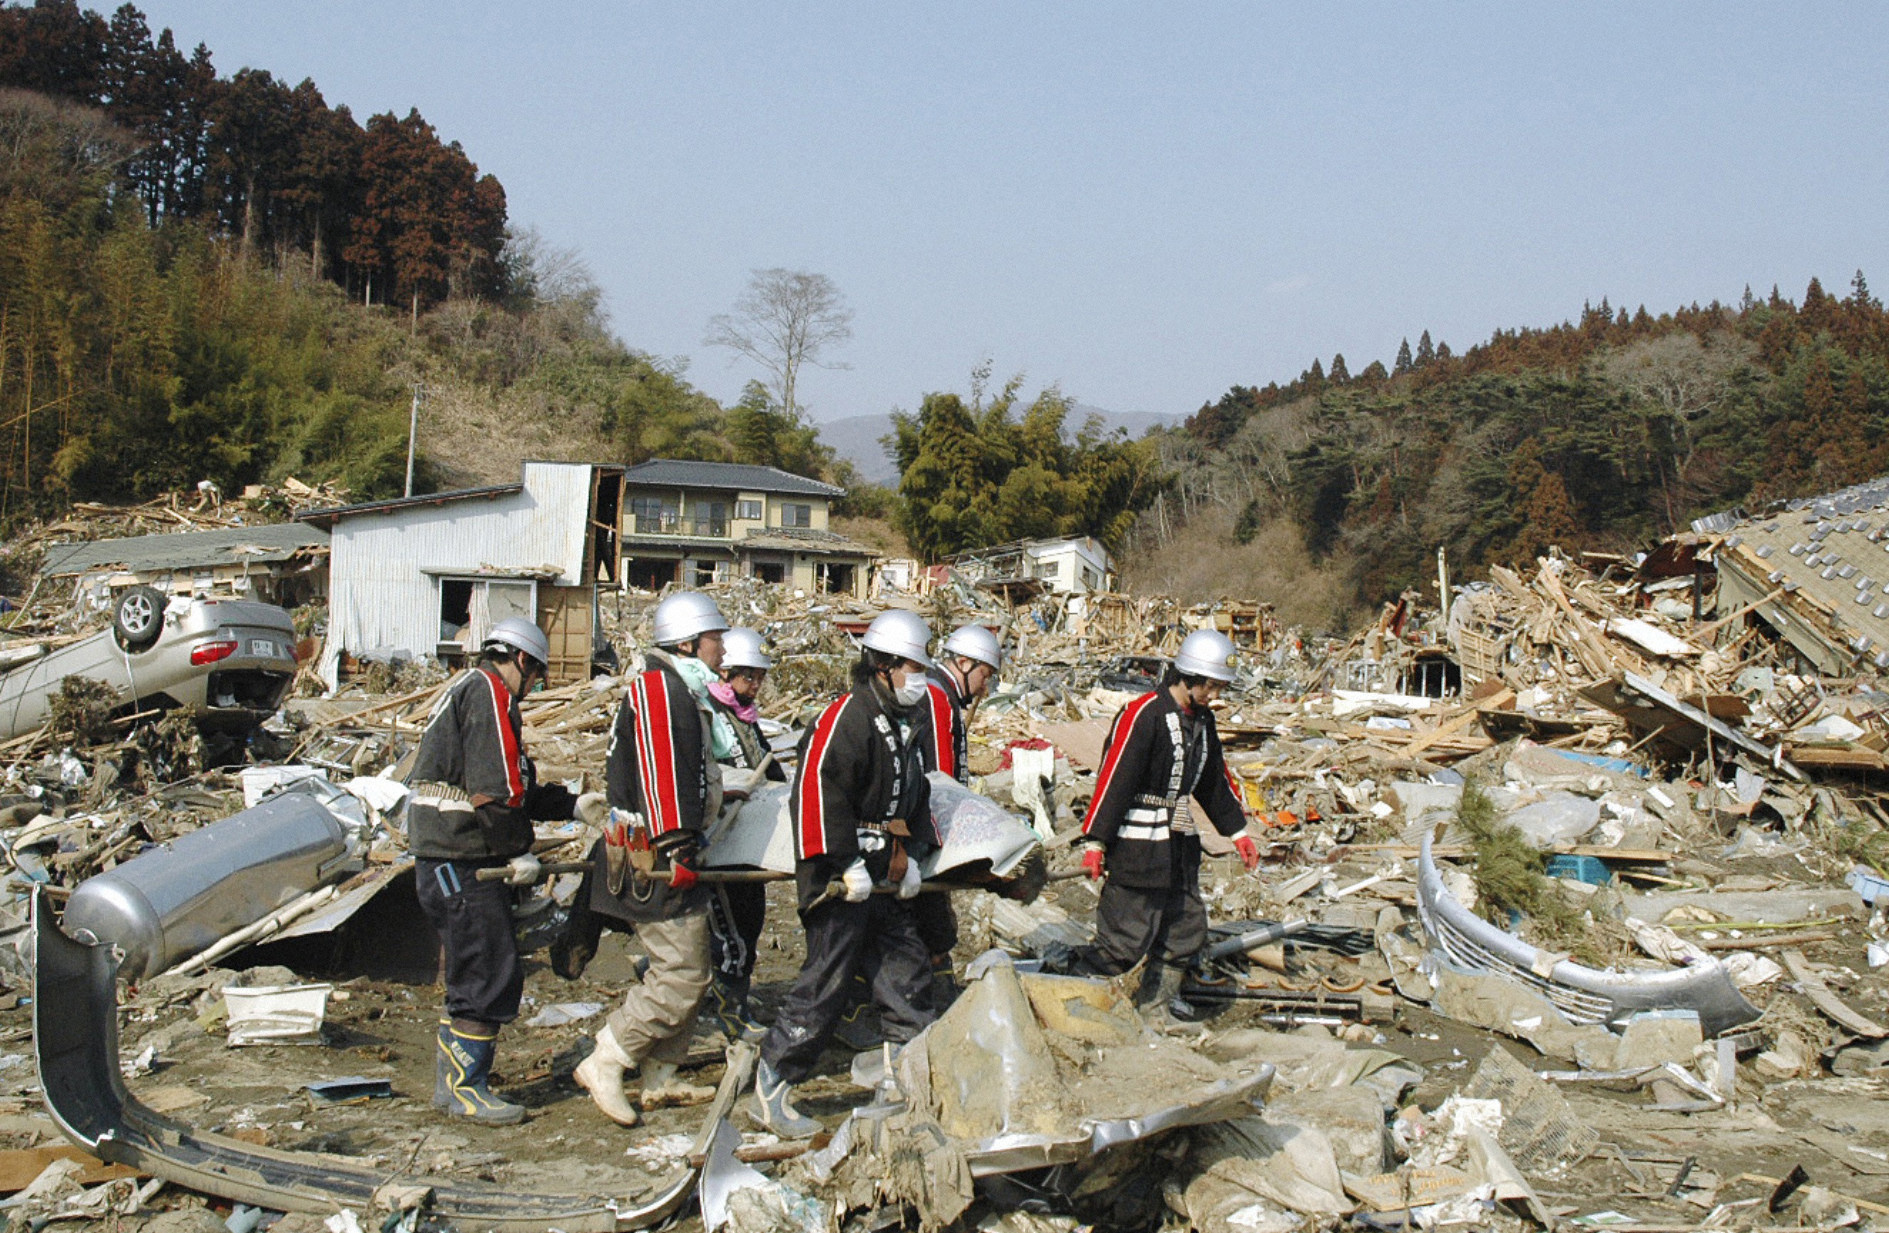 March 11, 2011: Massive Earthquake in Japan, Followed by a Tsunami and a Nuclear Disaster